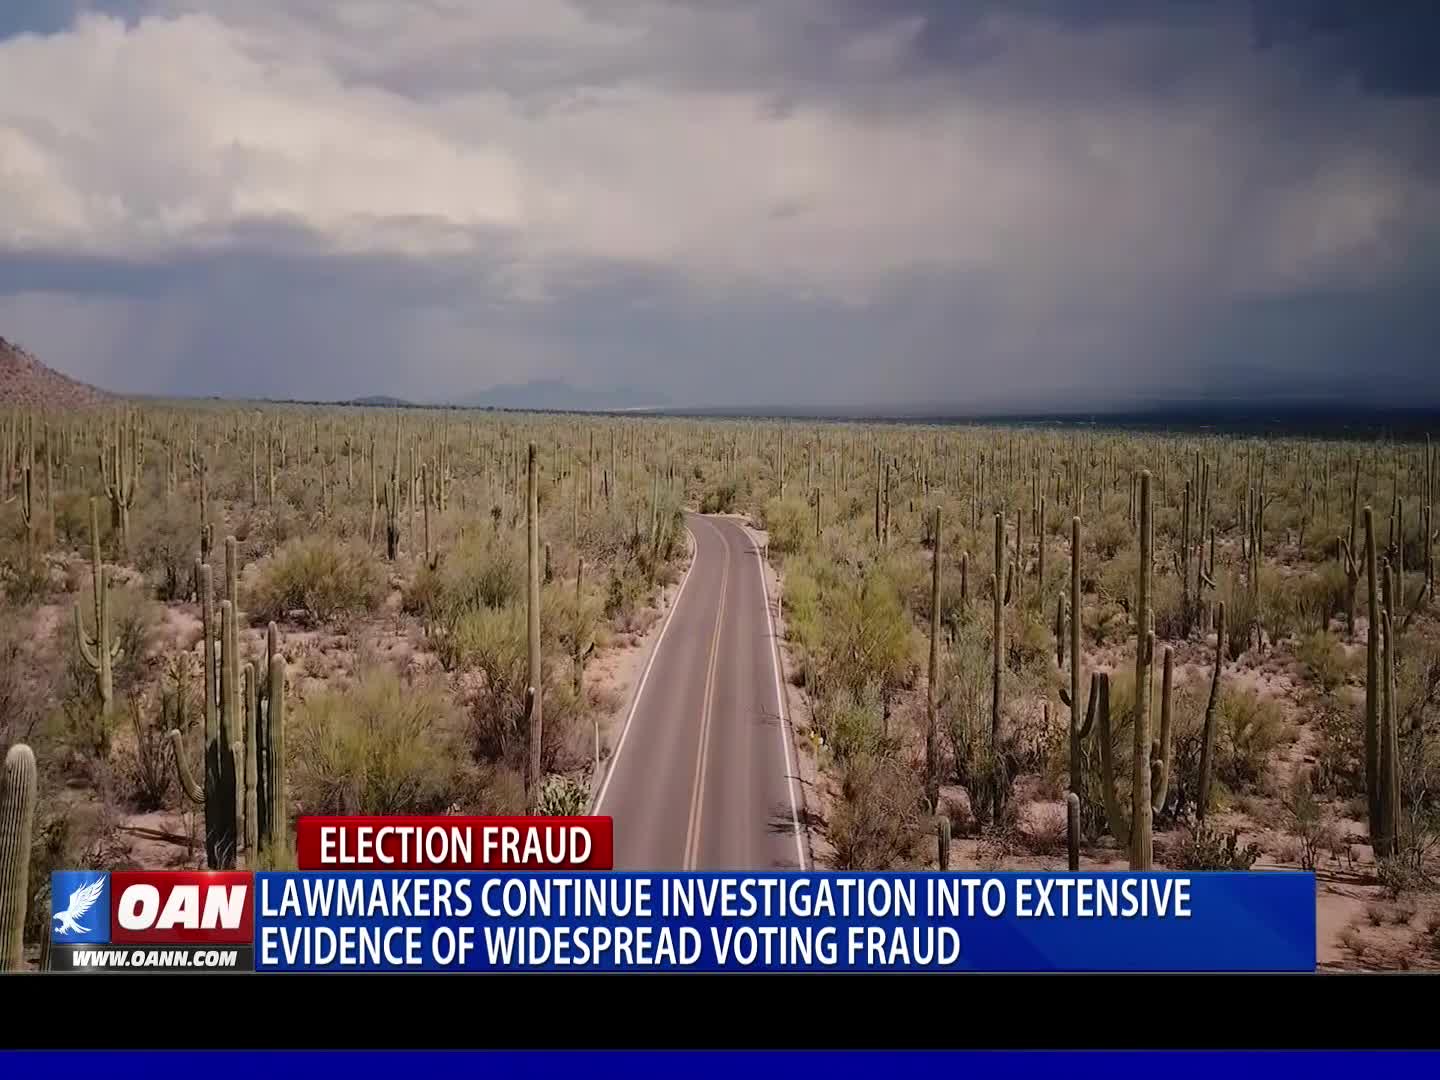 Lawmakers continue investigation into extensive evidence of widespread voting fraud